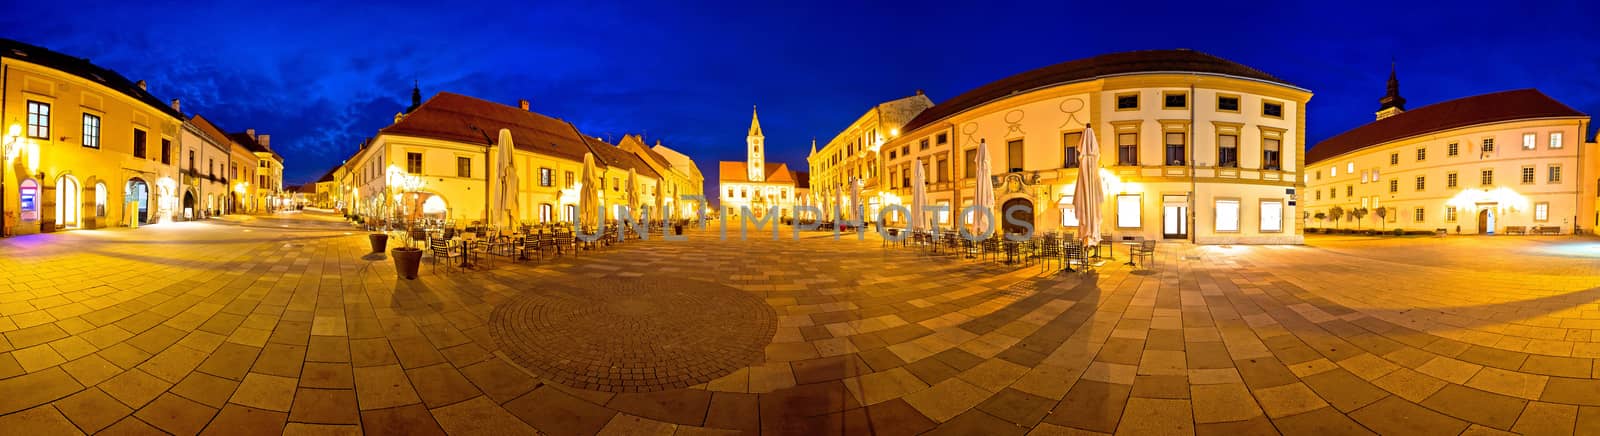 Town of Varazdin central square panorama by xbrchx